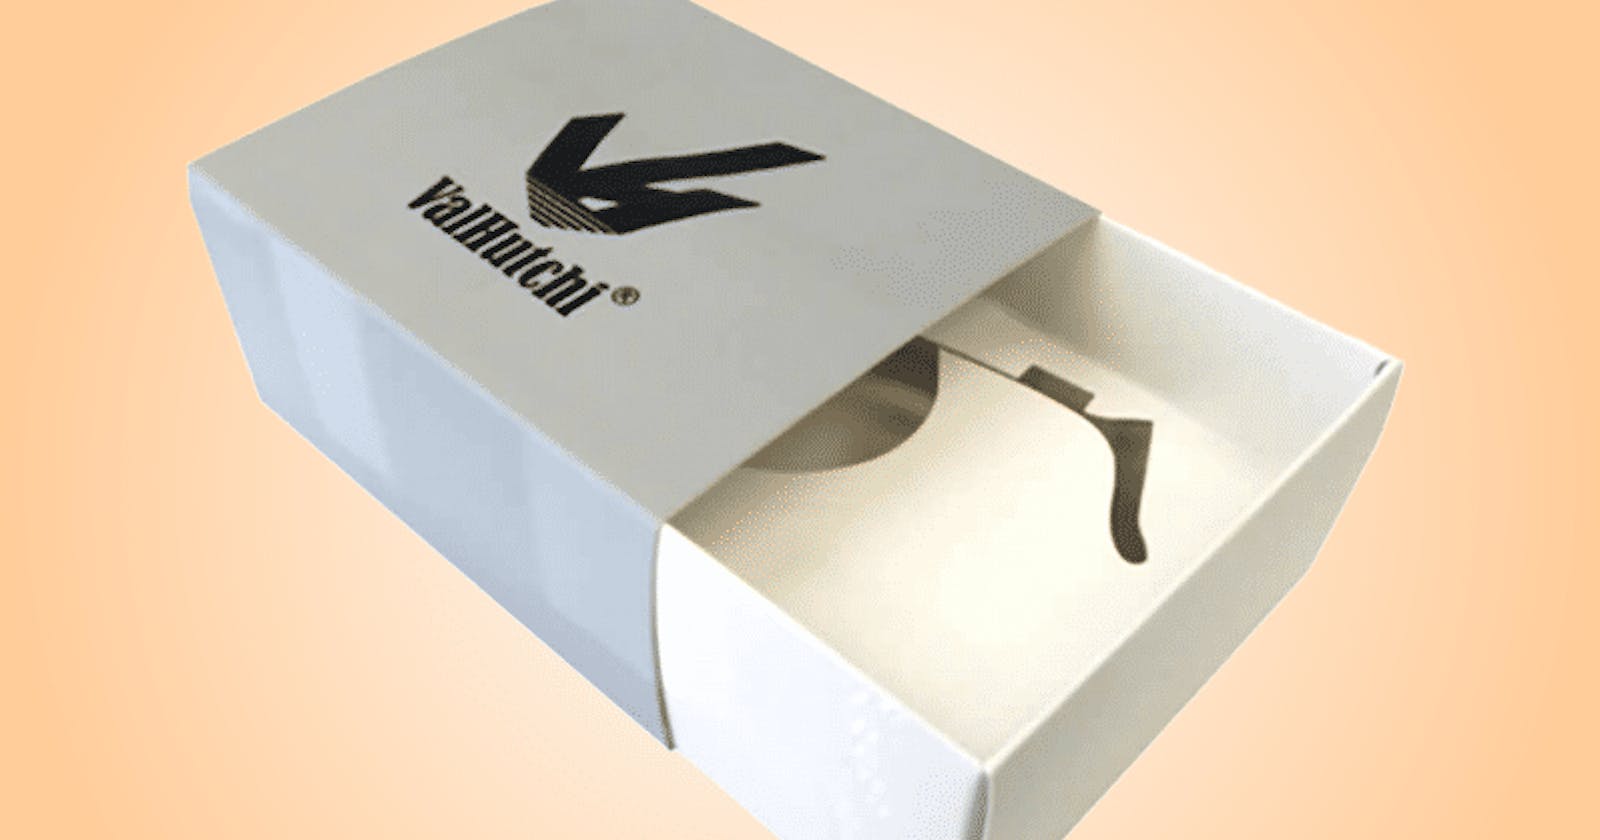 Intrigue your customers with custom sleeve boxes